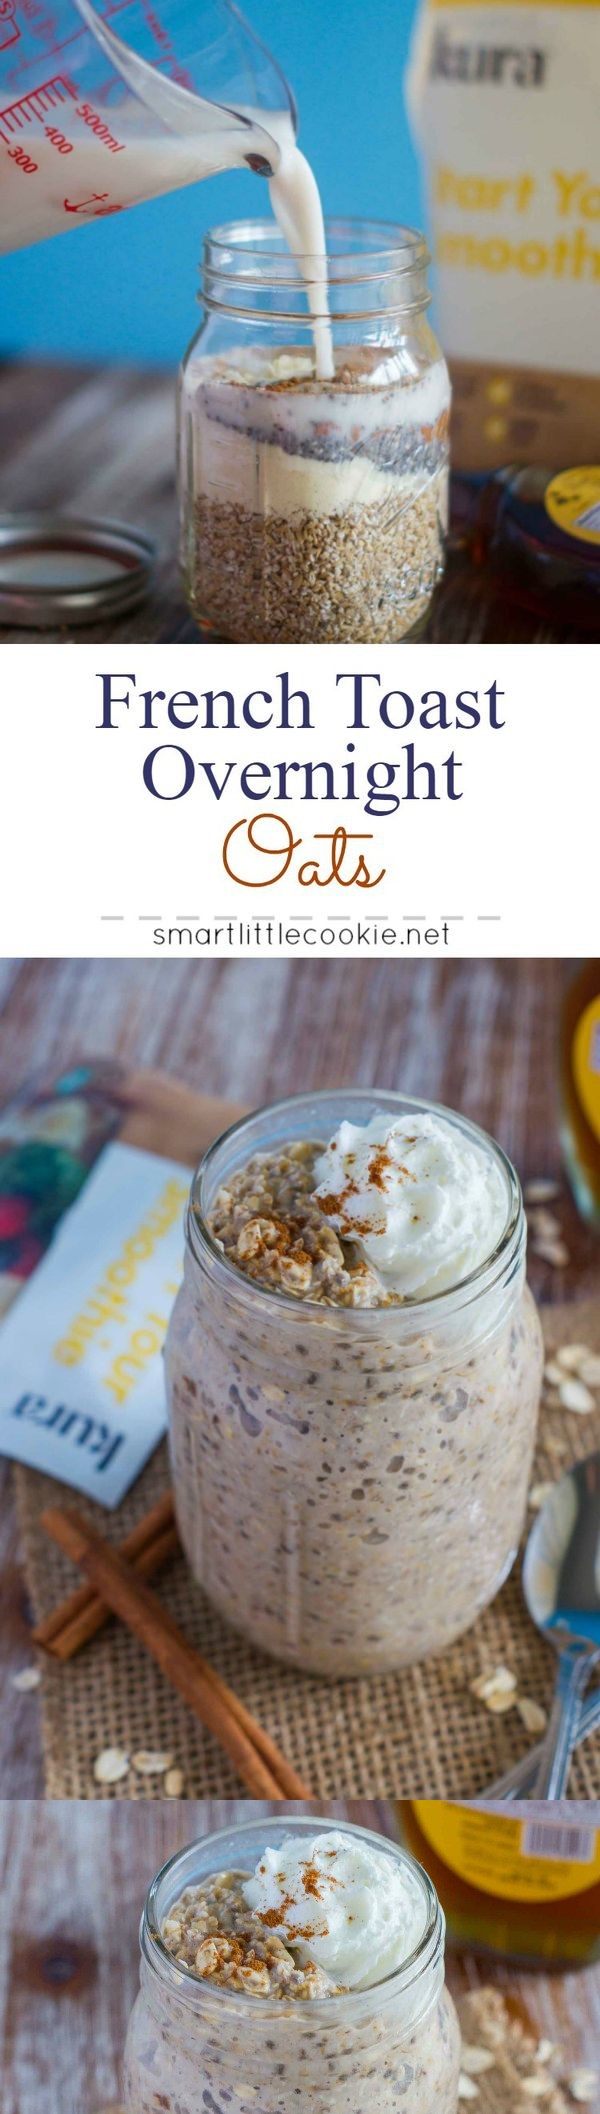 French Toast Overnight Oats